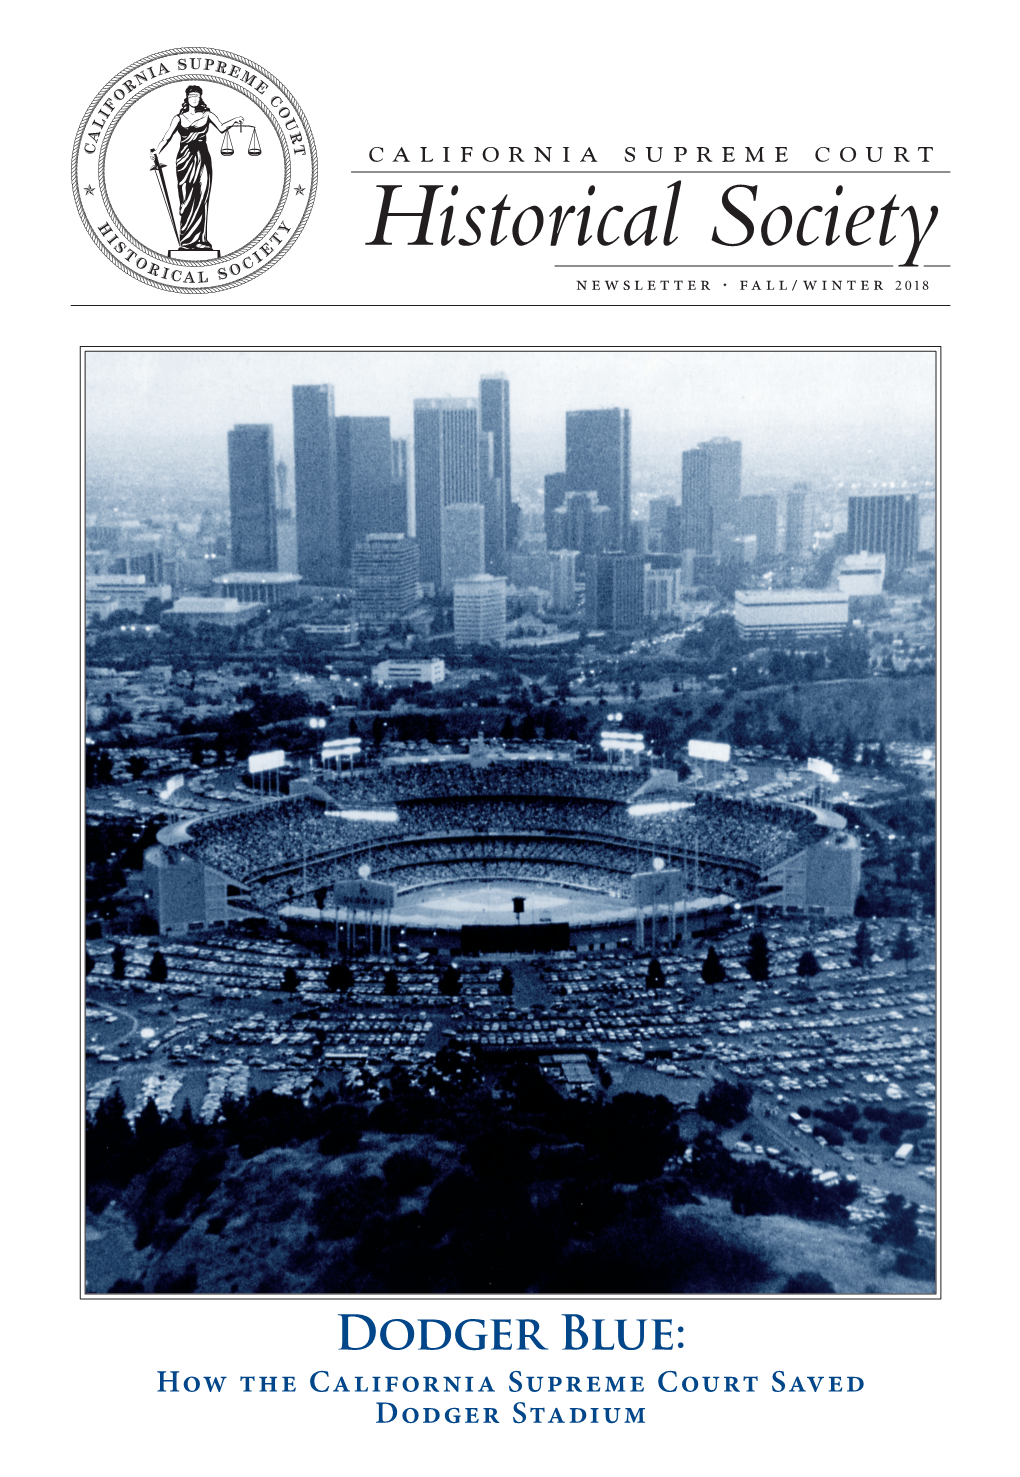 How the California Supreme Court Saved Dodger Stadium How the California Supreme Court Saved Dodger Stadium and Helped Create Modern Los Angeles by Jerald Podair*